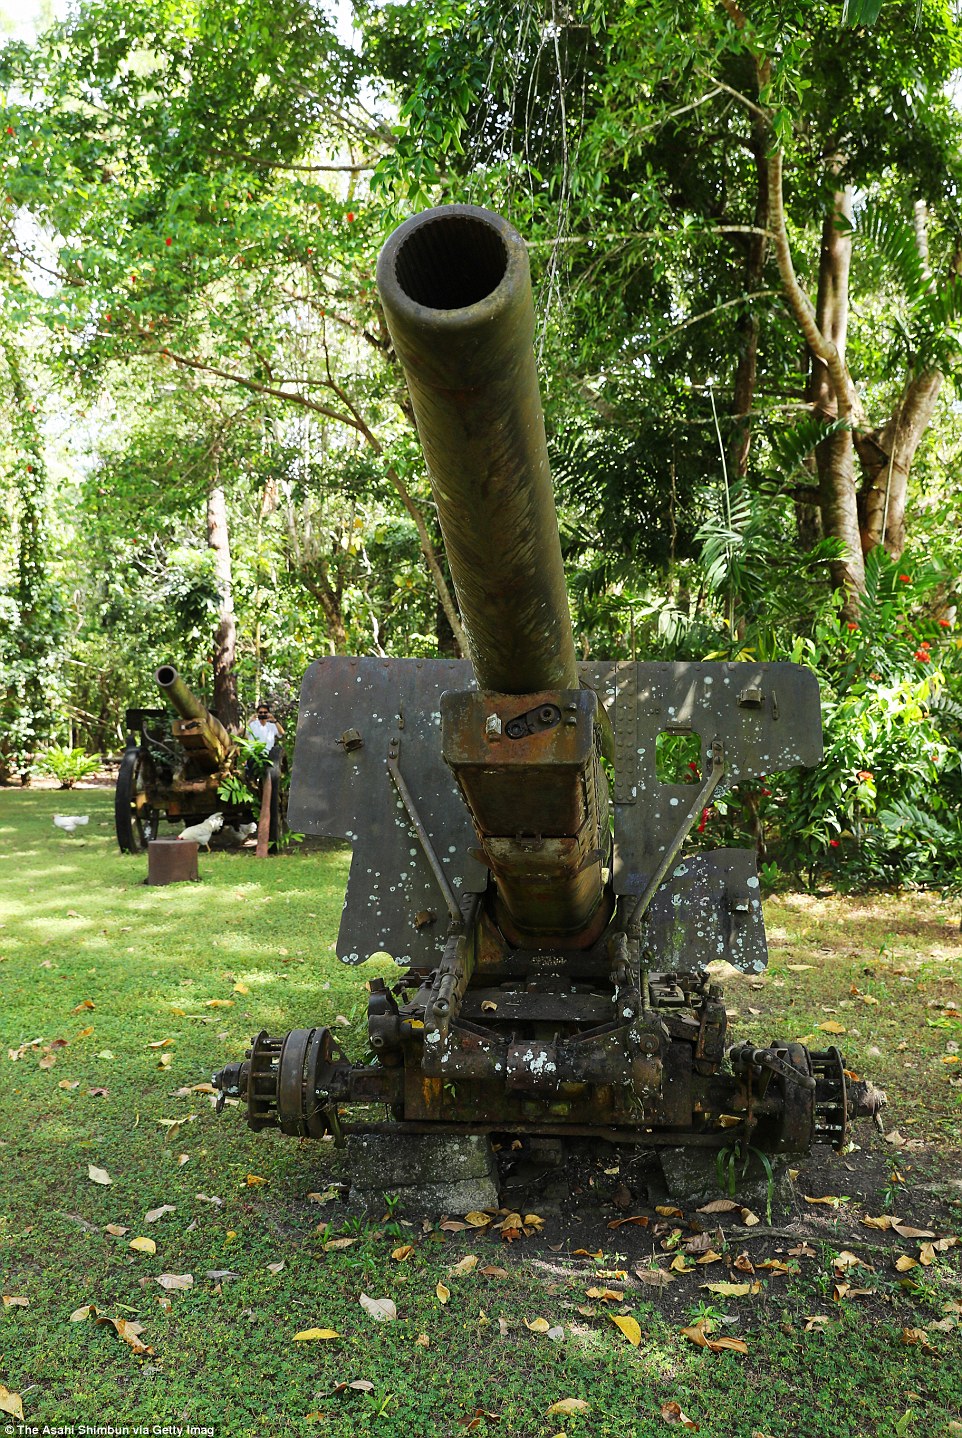 3B1221C500000578-4003520-A_Type_96_15_cm_howitzer_used_by_Imperial_Japan_Army_in_Guadalca-a-15_1480994575442